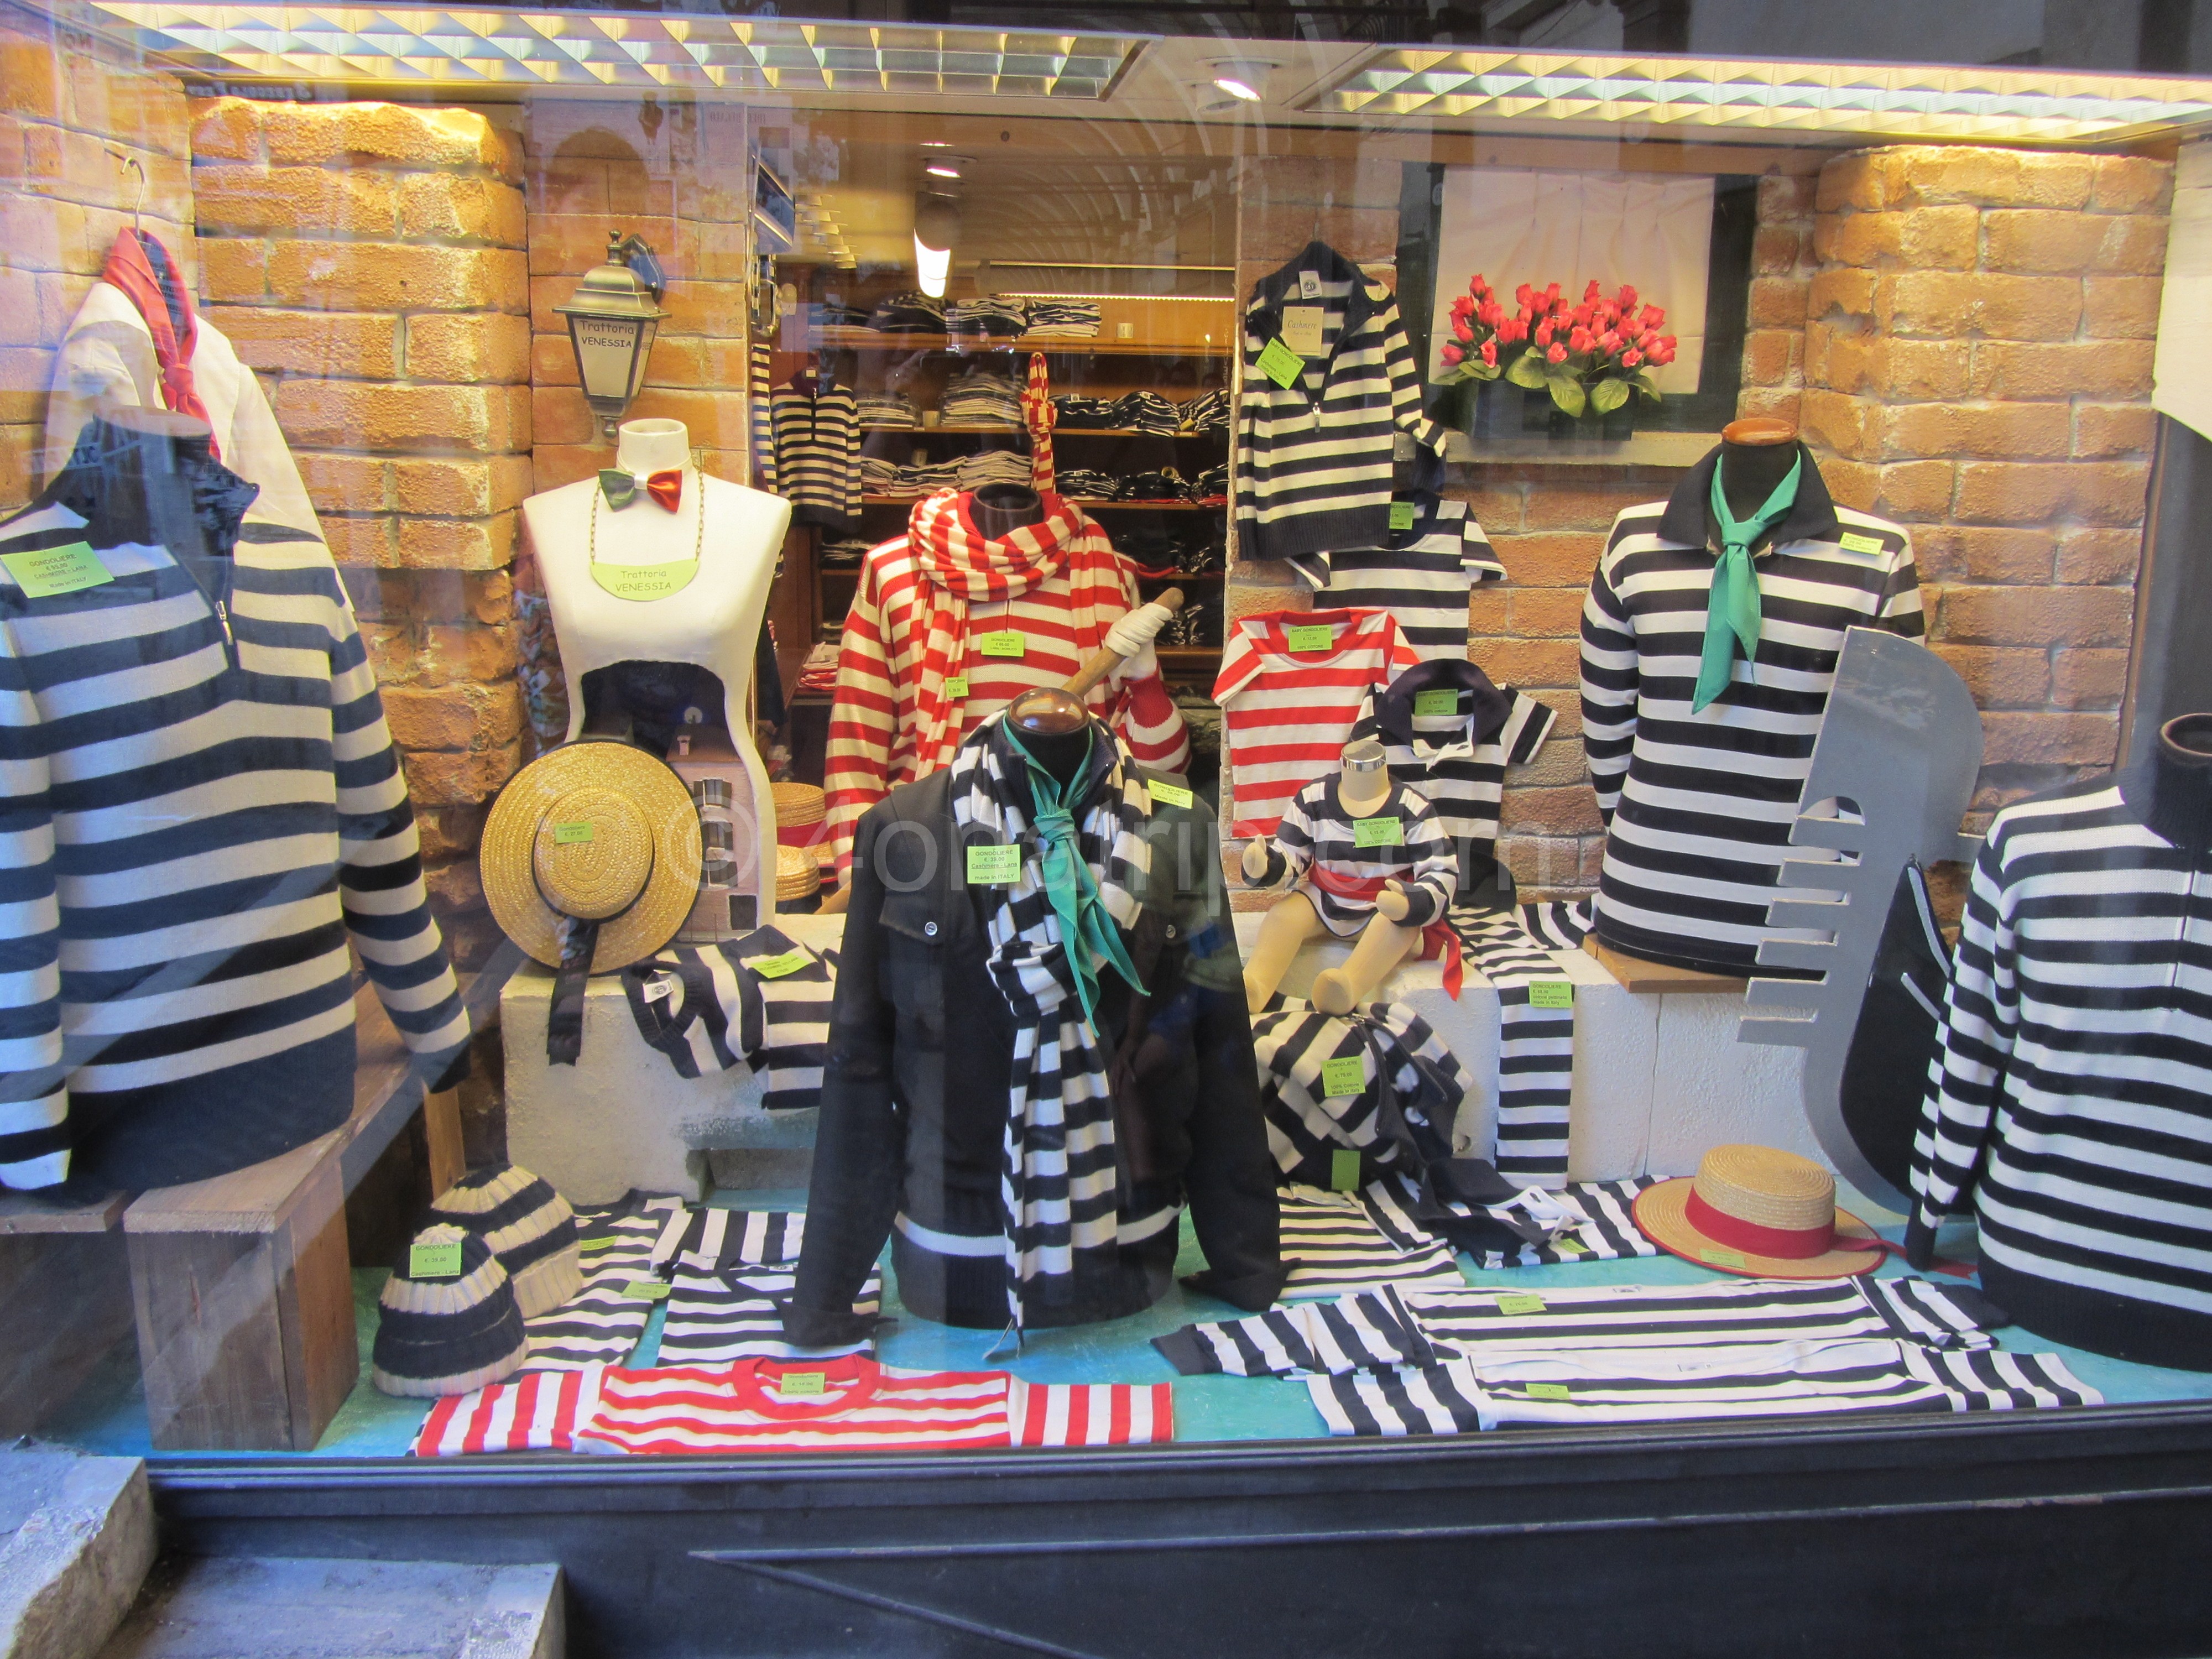 Gondolier inspired clothes Venice, Italy